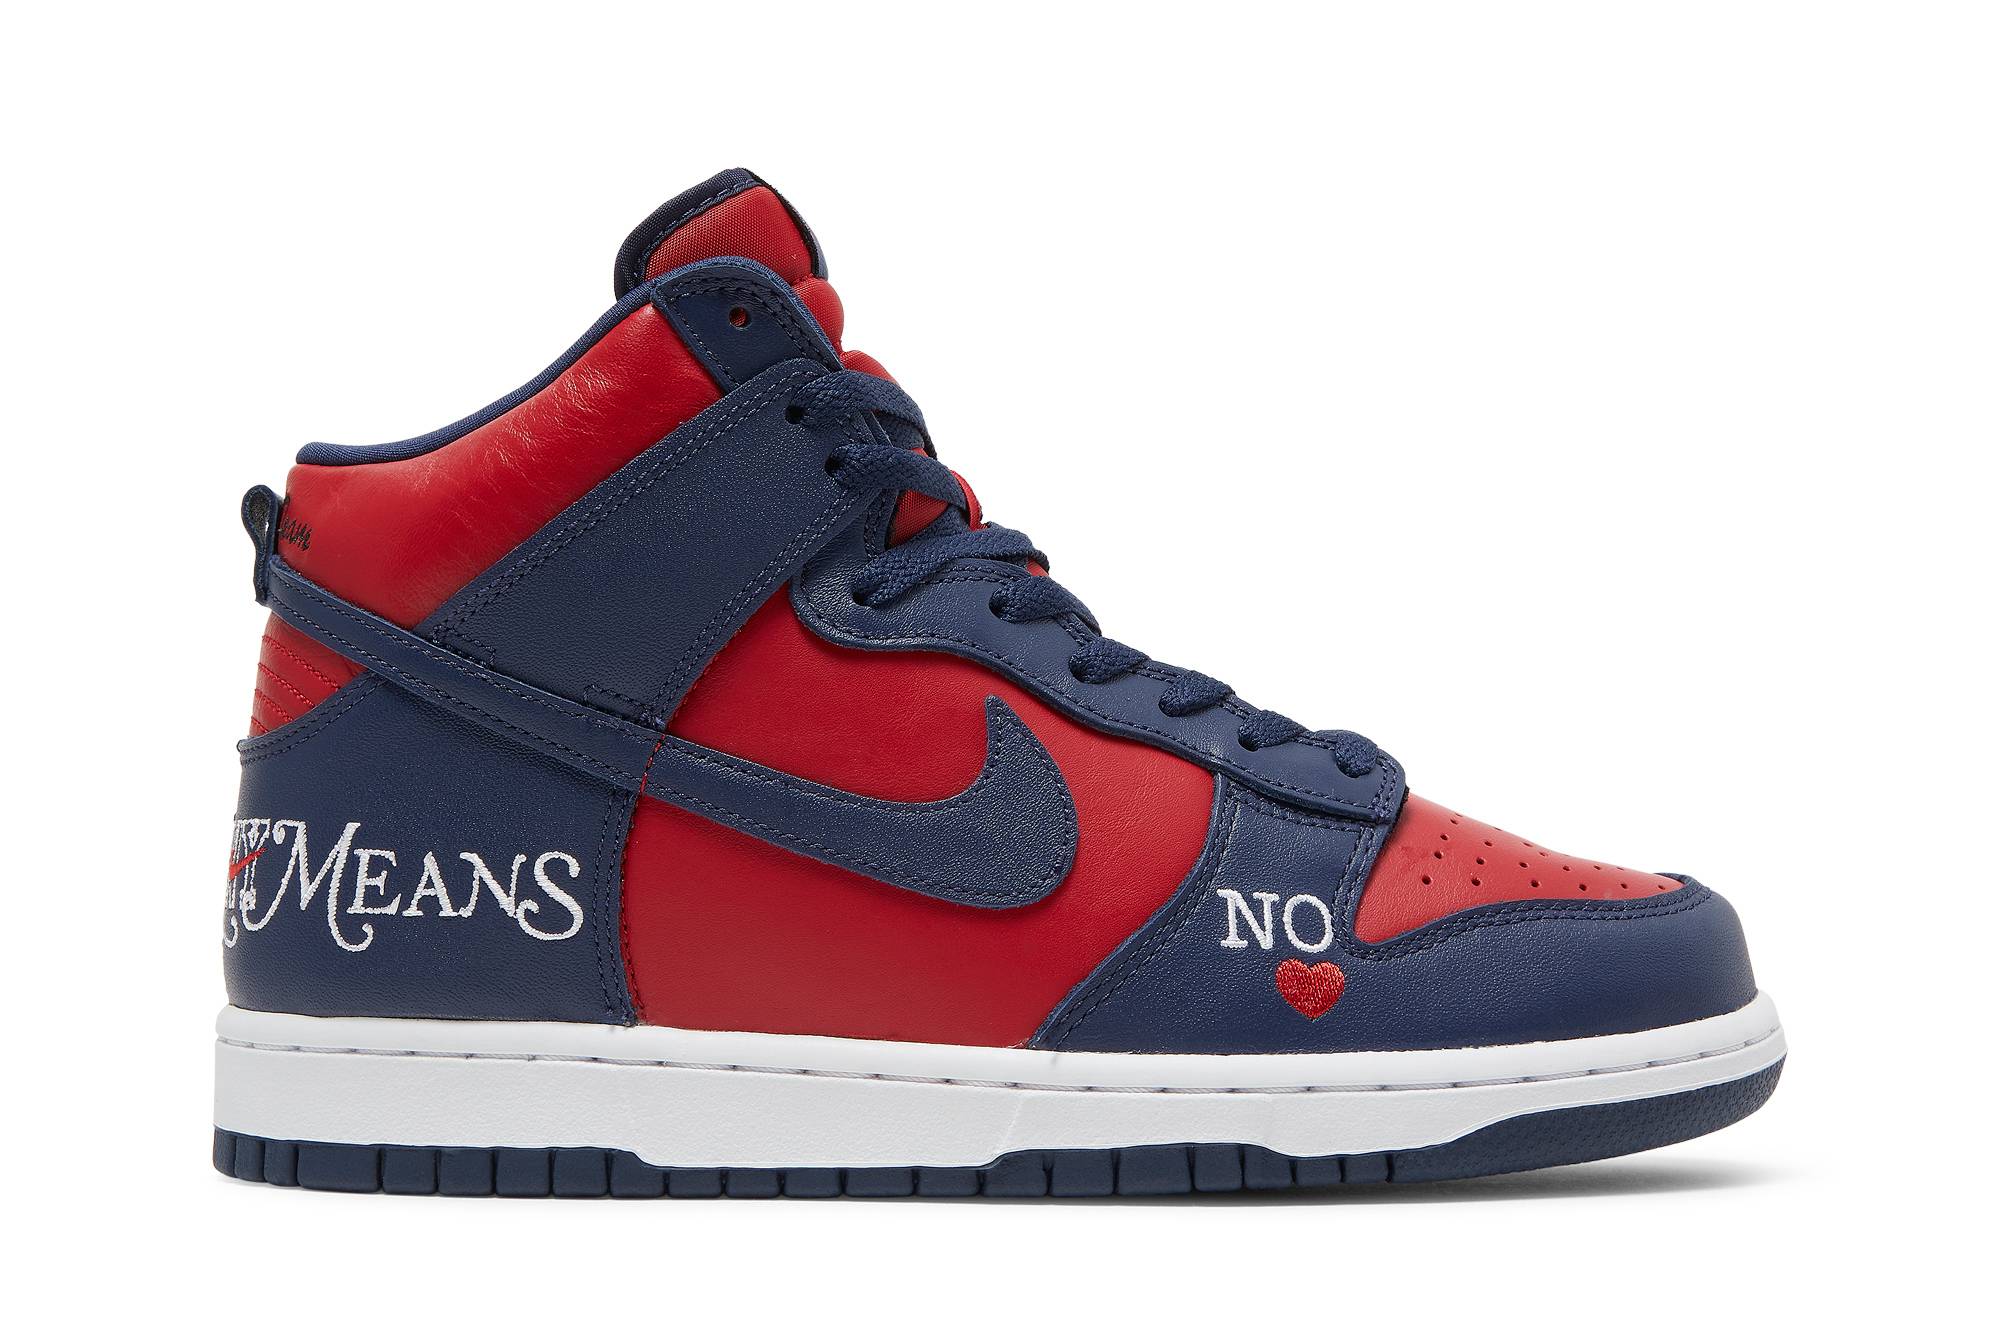 Supreme x Nike SB Dunk High 'By Any Means Navy' DN3741-600 - DN3741-600 -  Novelship